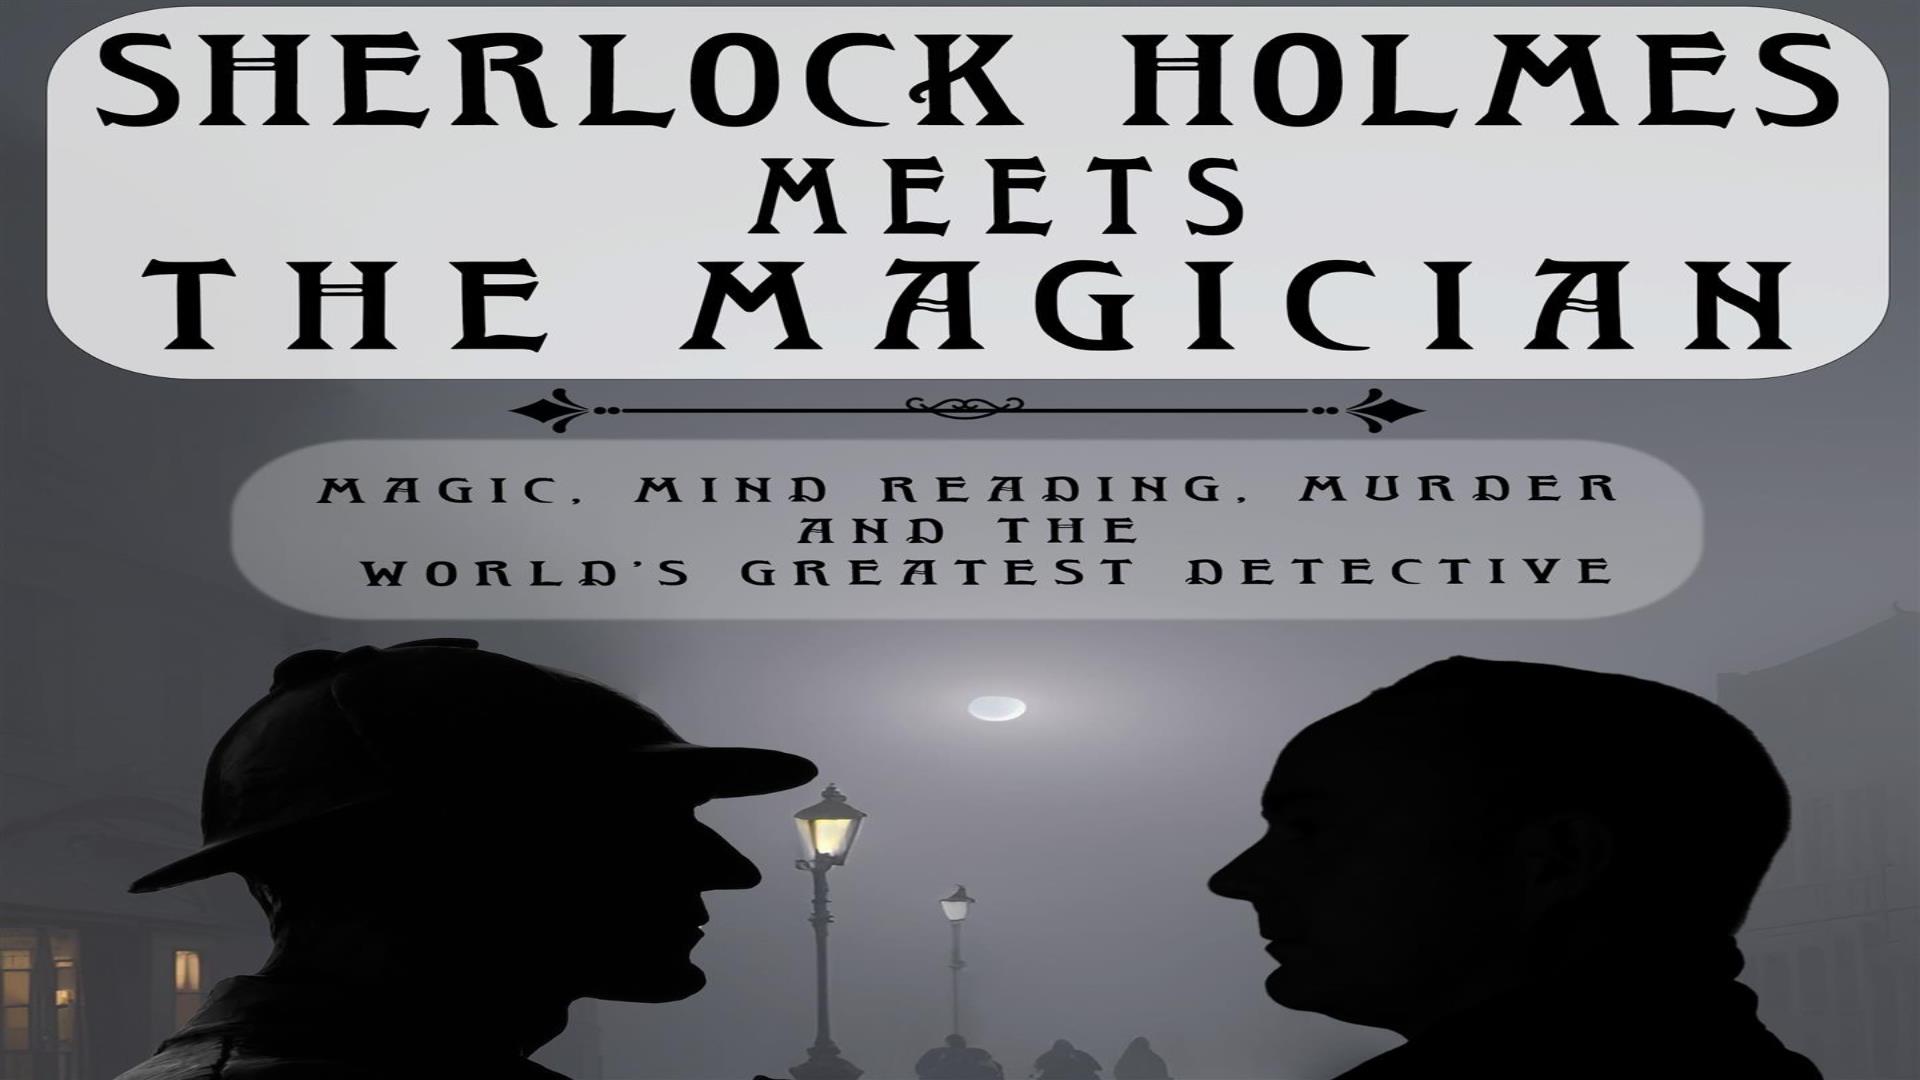 Black and White Poster of Sherlock Holmes Meets The Magician